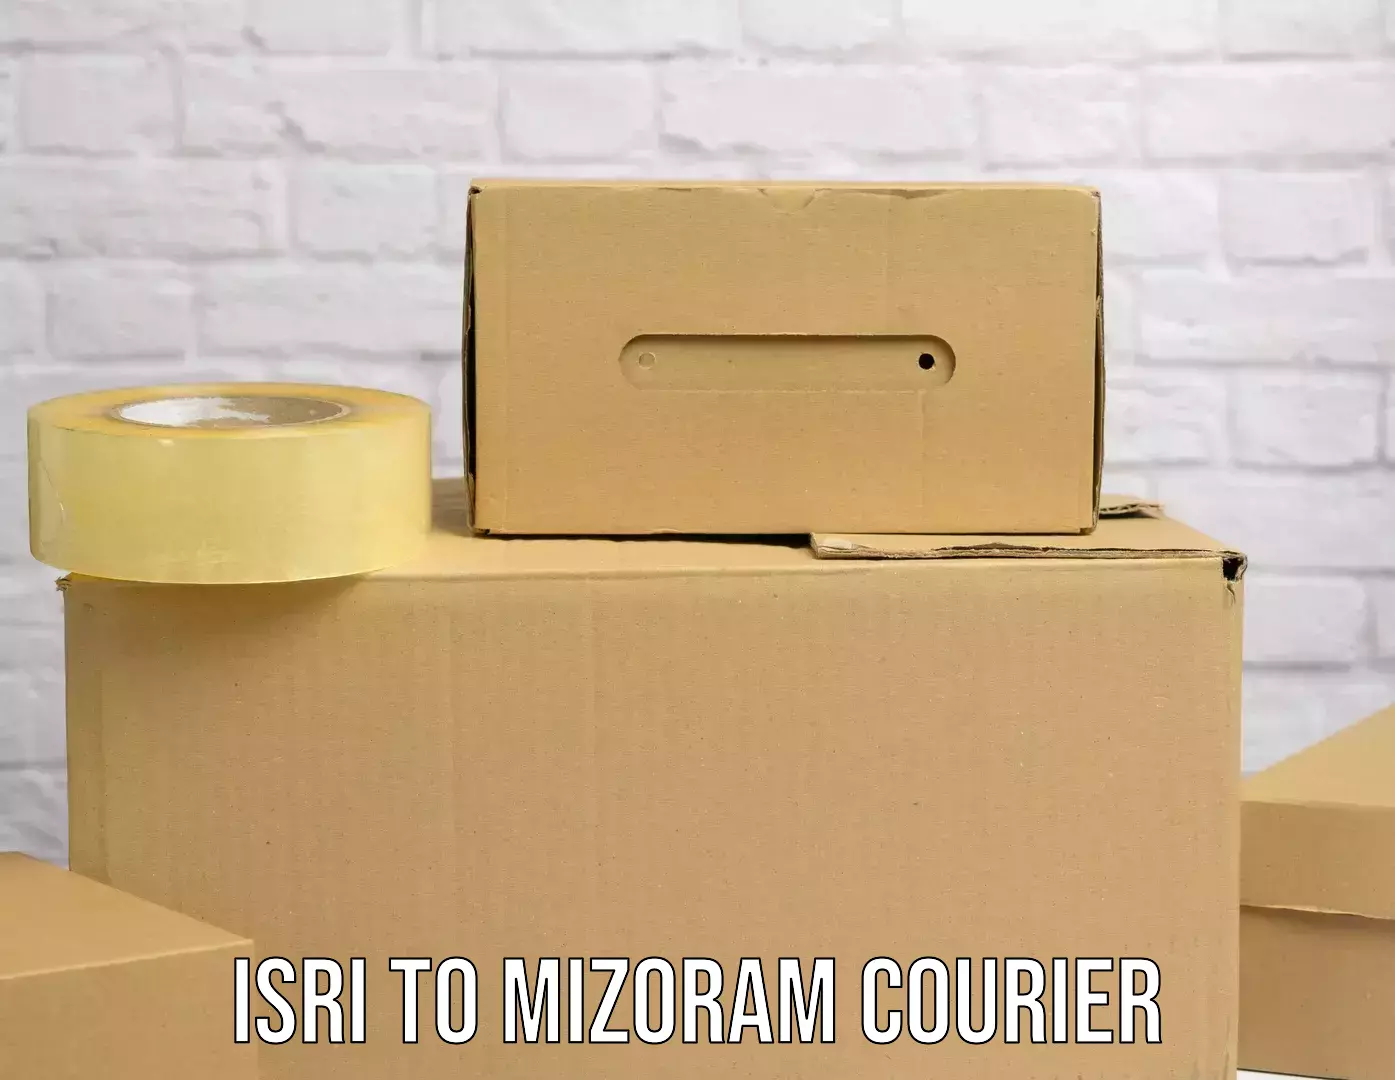 Full-service courier options Isri to Siaha